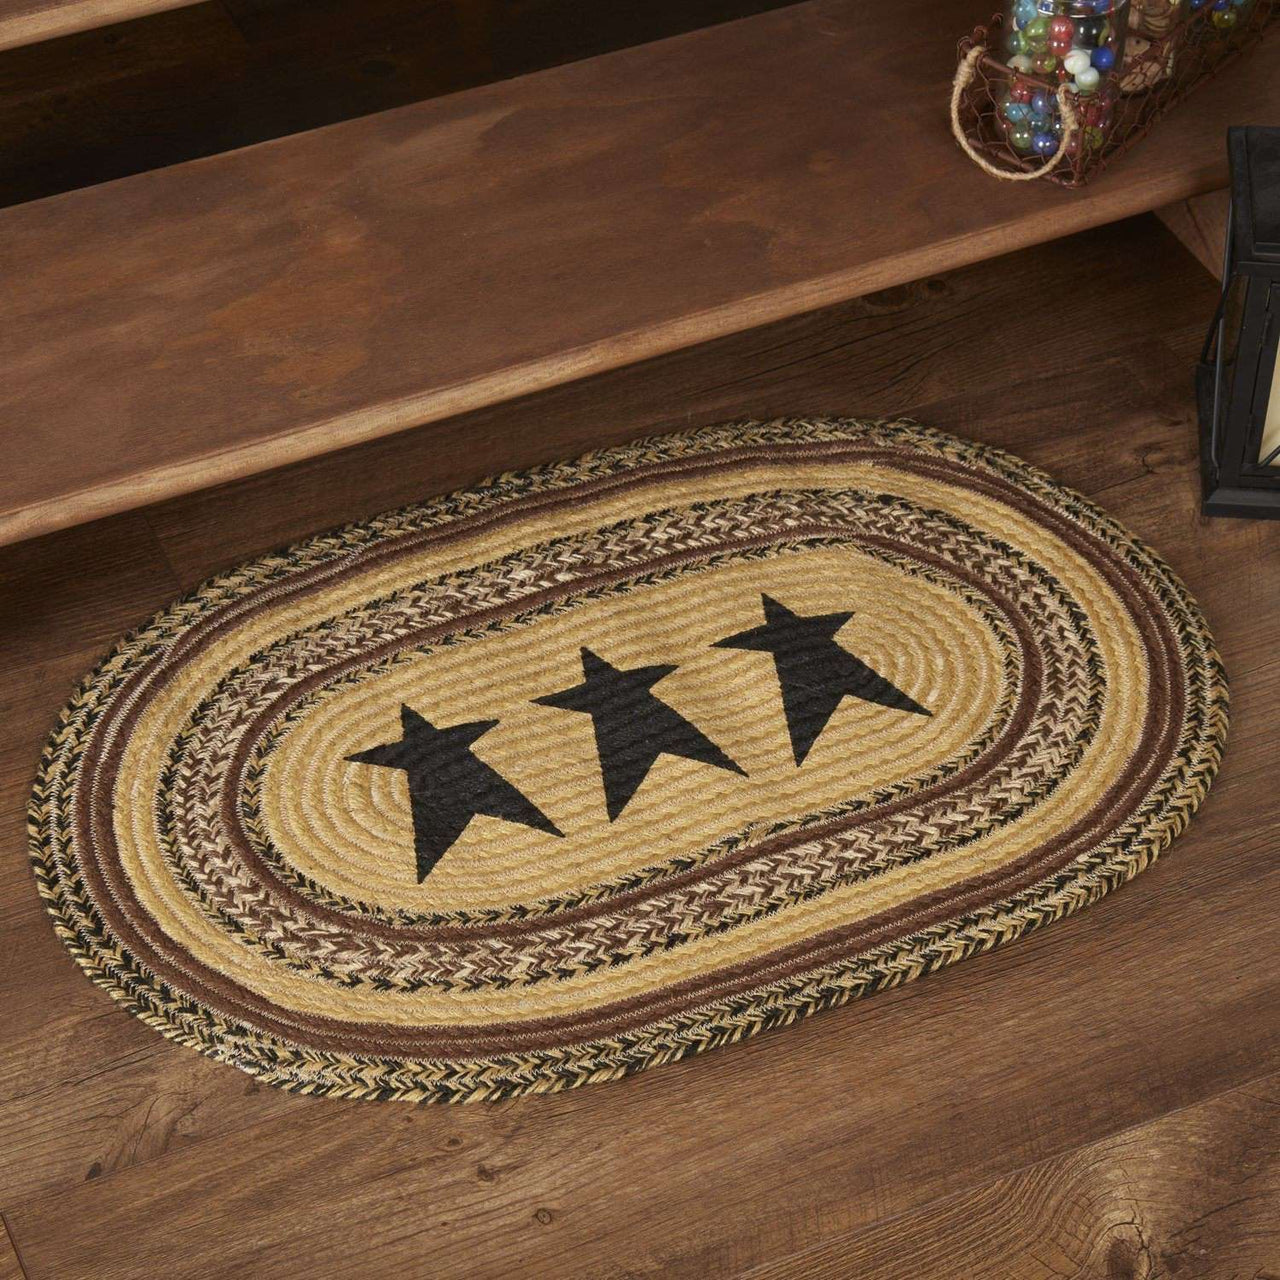 Kettle Grove Jute Braided Rugs Oval Stencil Star VHC Brands Rugs VHC Brands 